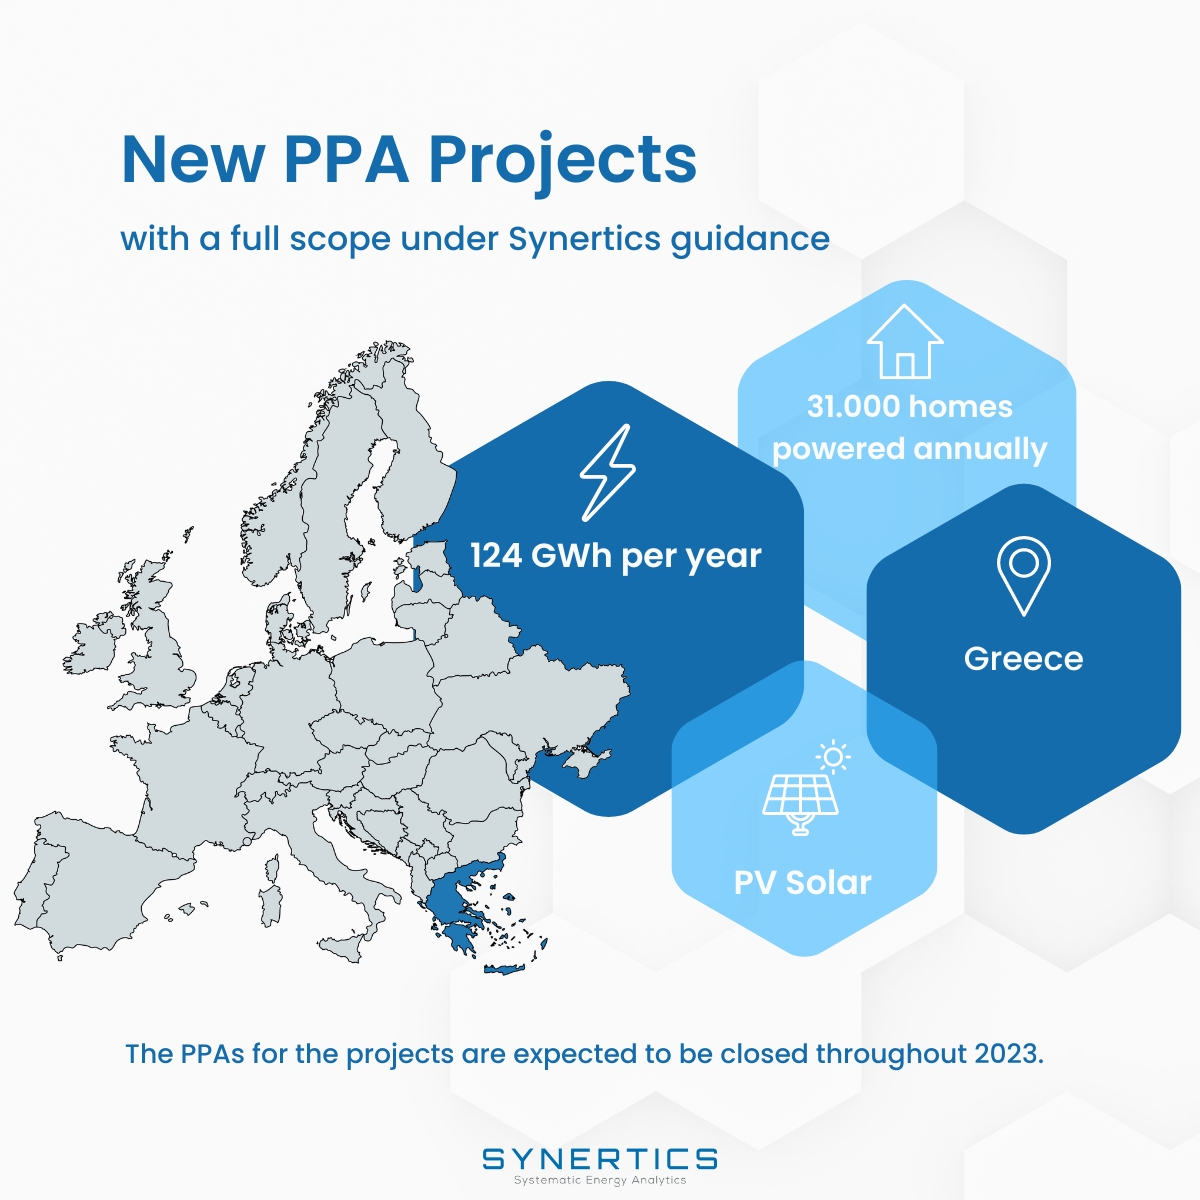 New PPA project in Greece